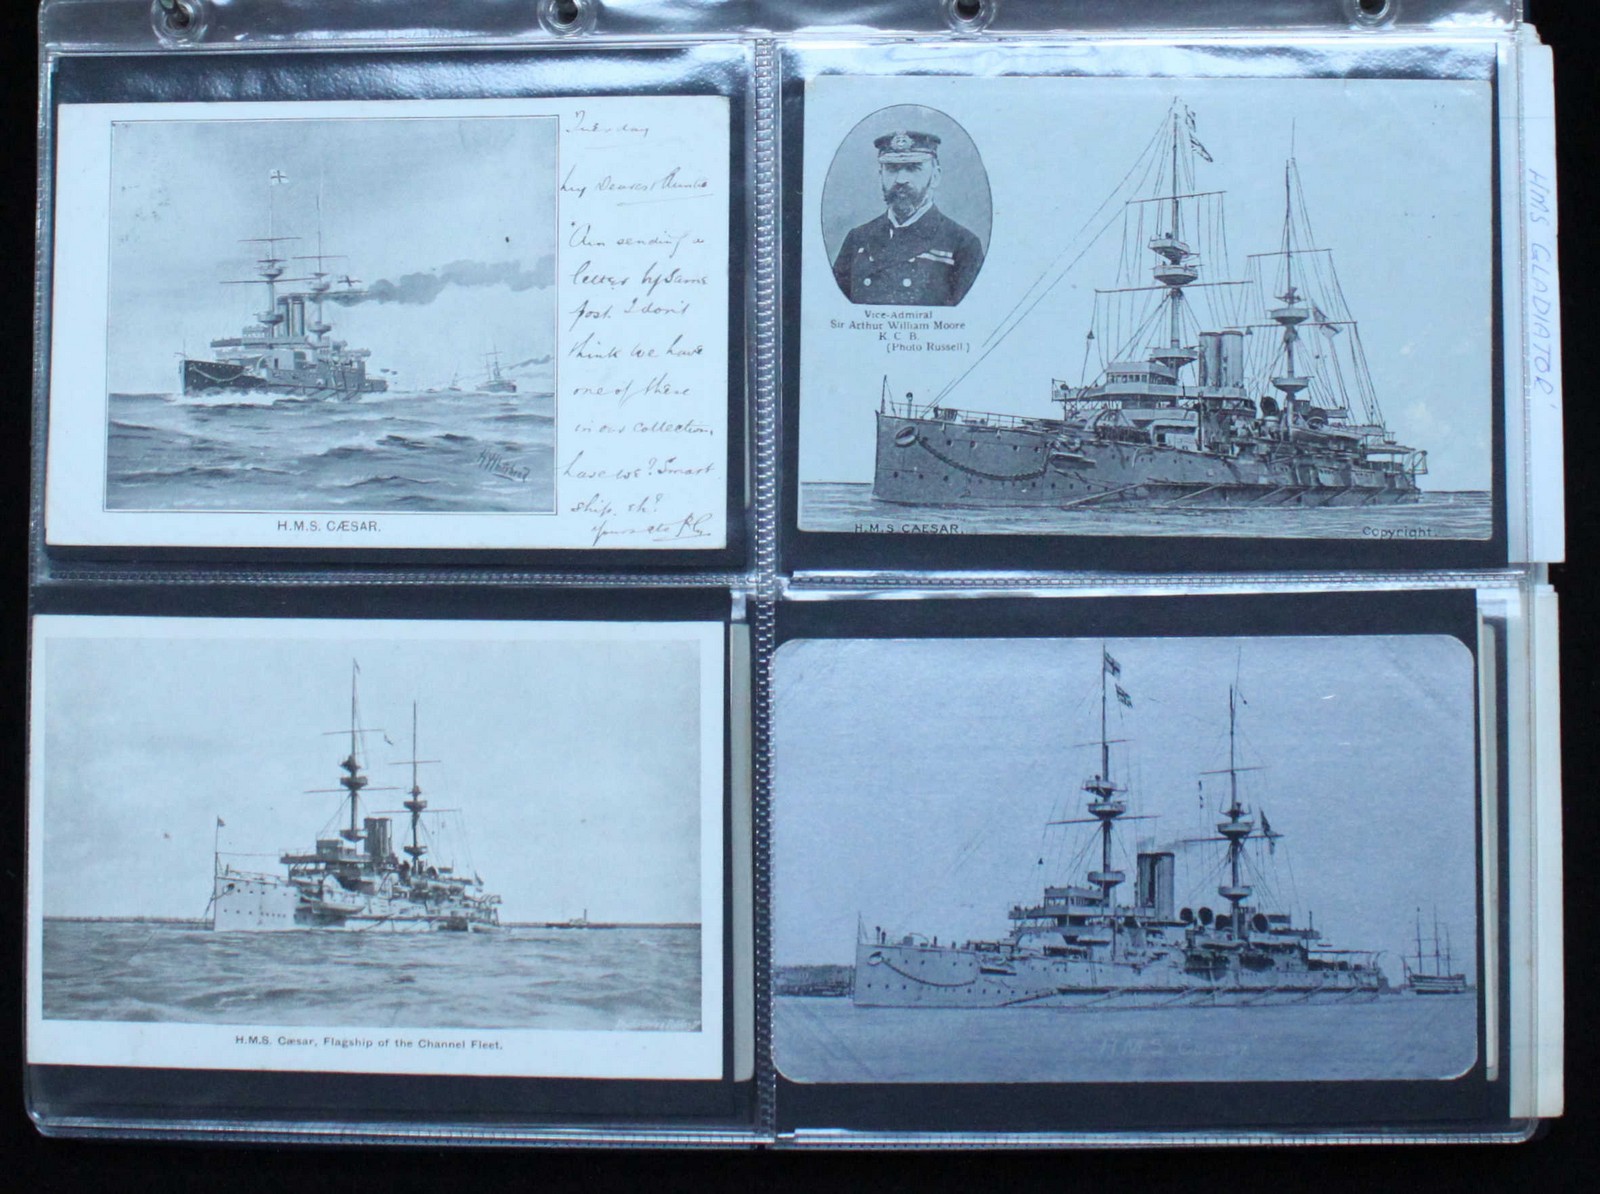 Approximately 158 postcards, Real Photographic and Printed, Royal Navy ships, RN Sports Teams,